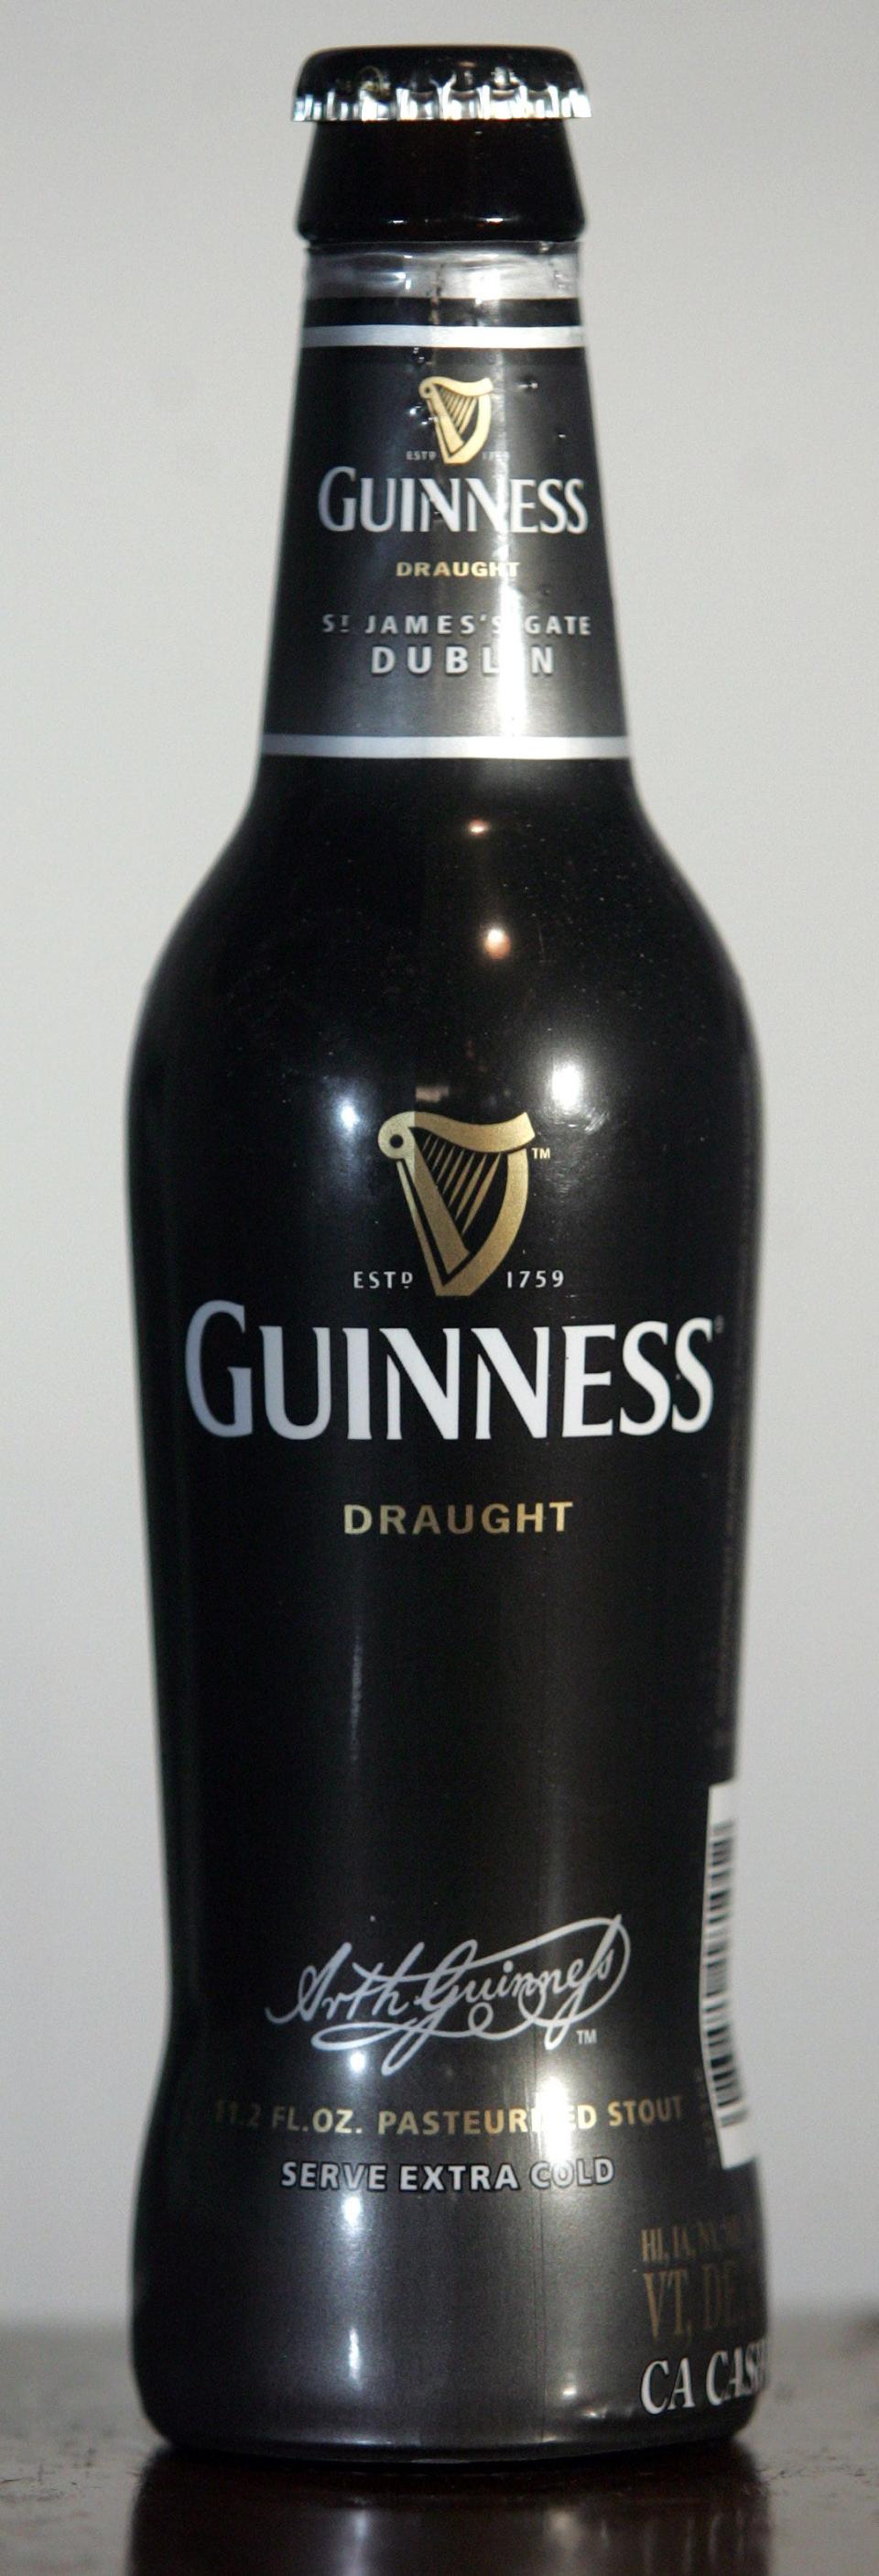 Guinness is served at a variety of temperatures.